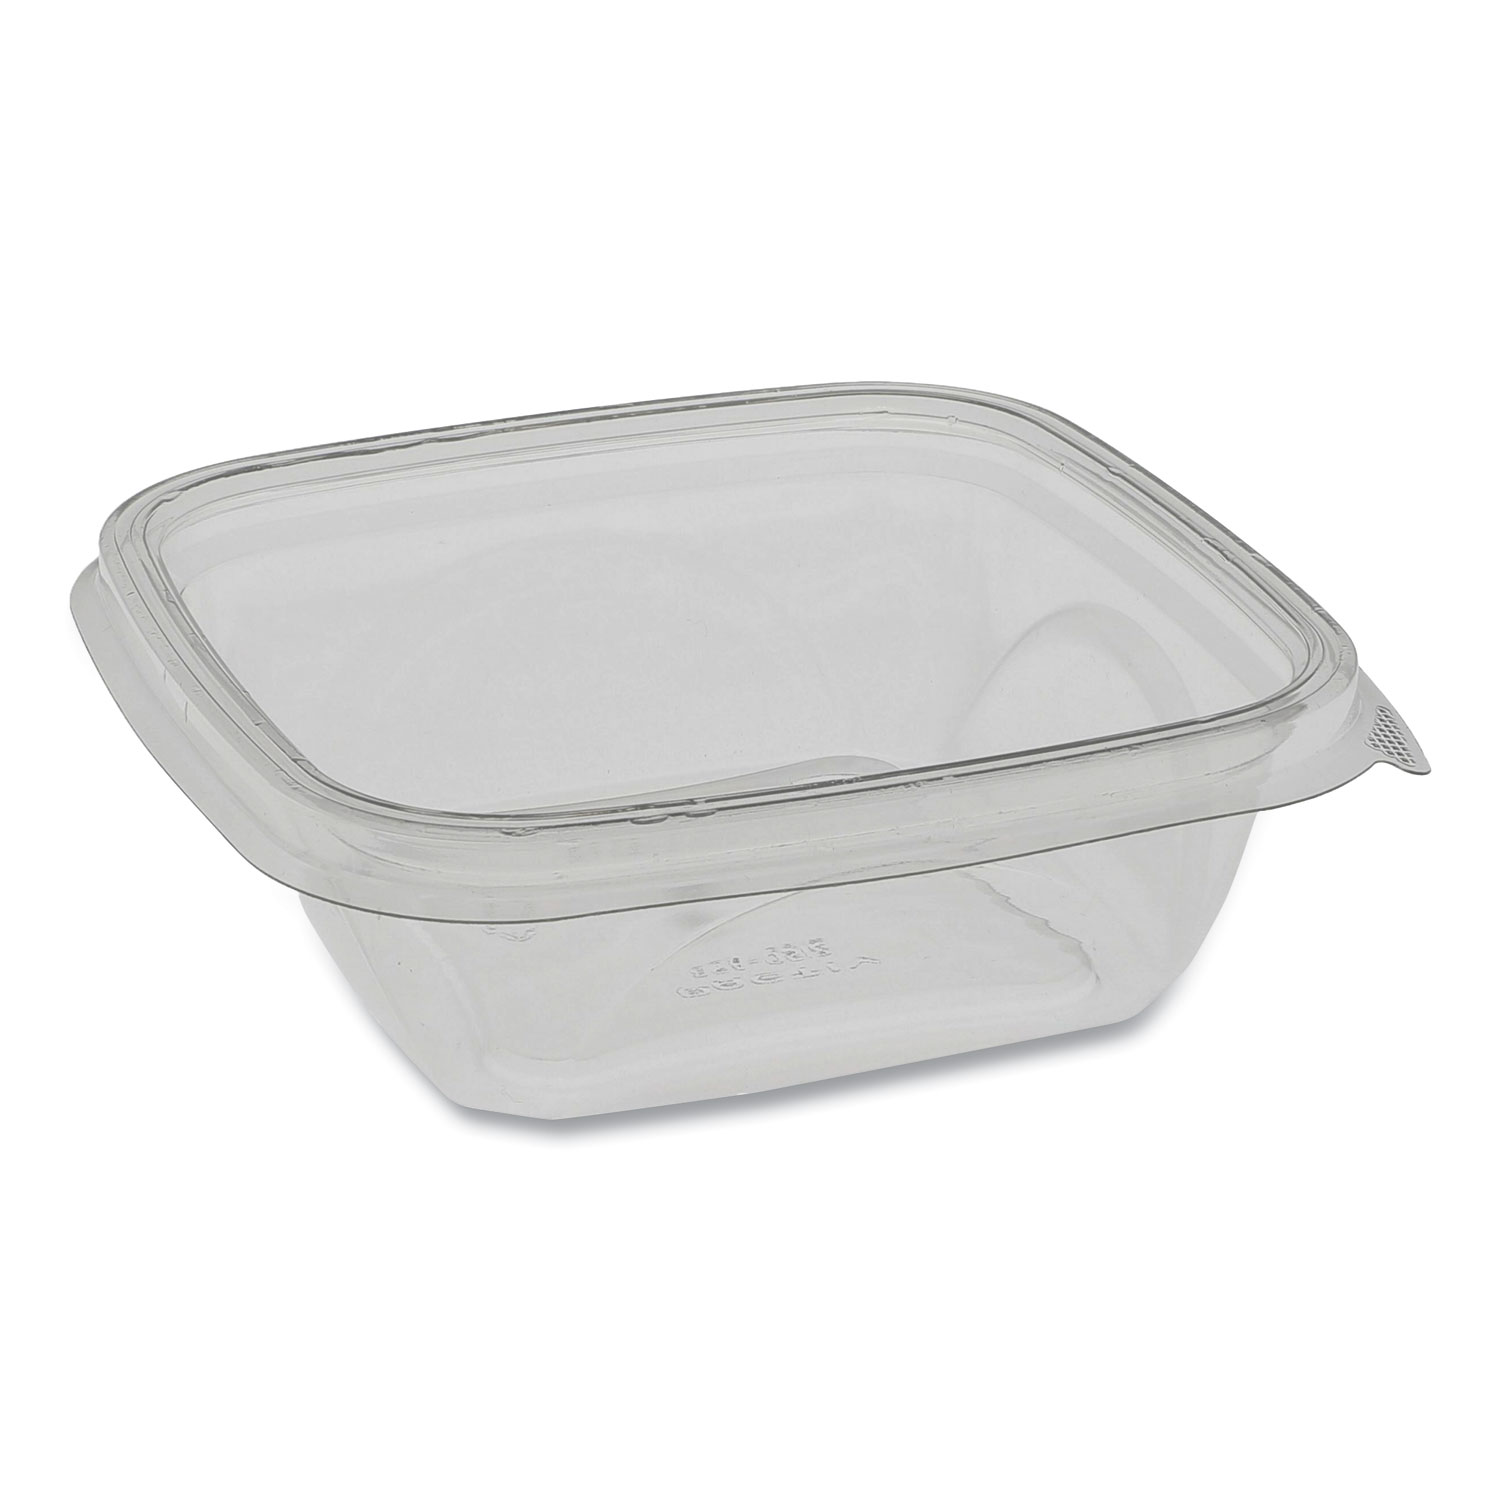  Pactiv SAC0512 EarthChoice Recycled PET Square Base Salad Containers, 5 x 5 x 1.63, 12 oz, Clear, 504/Carton (PCTSAC0512) 